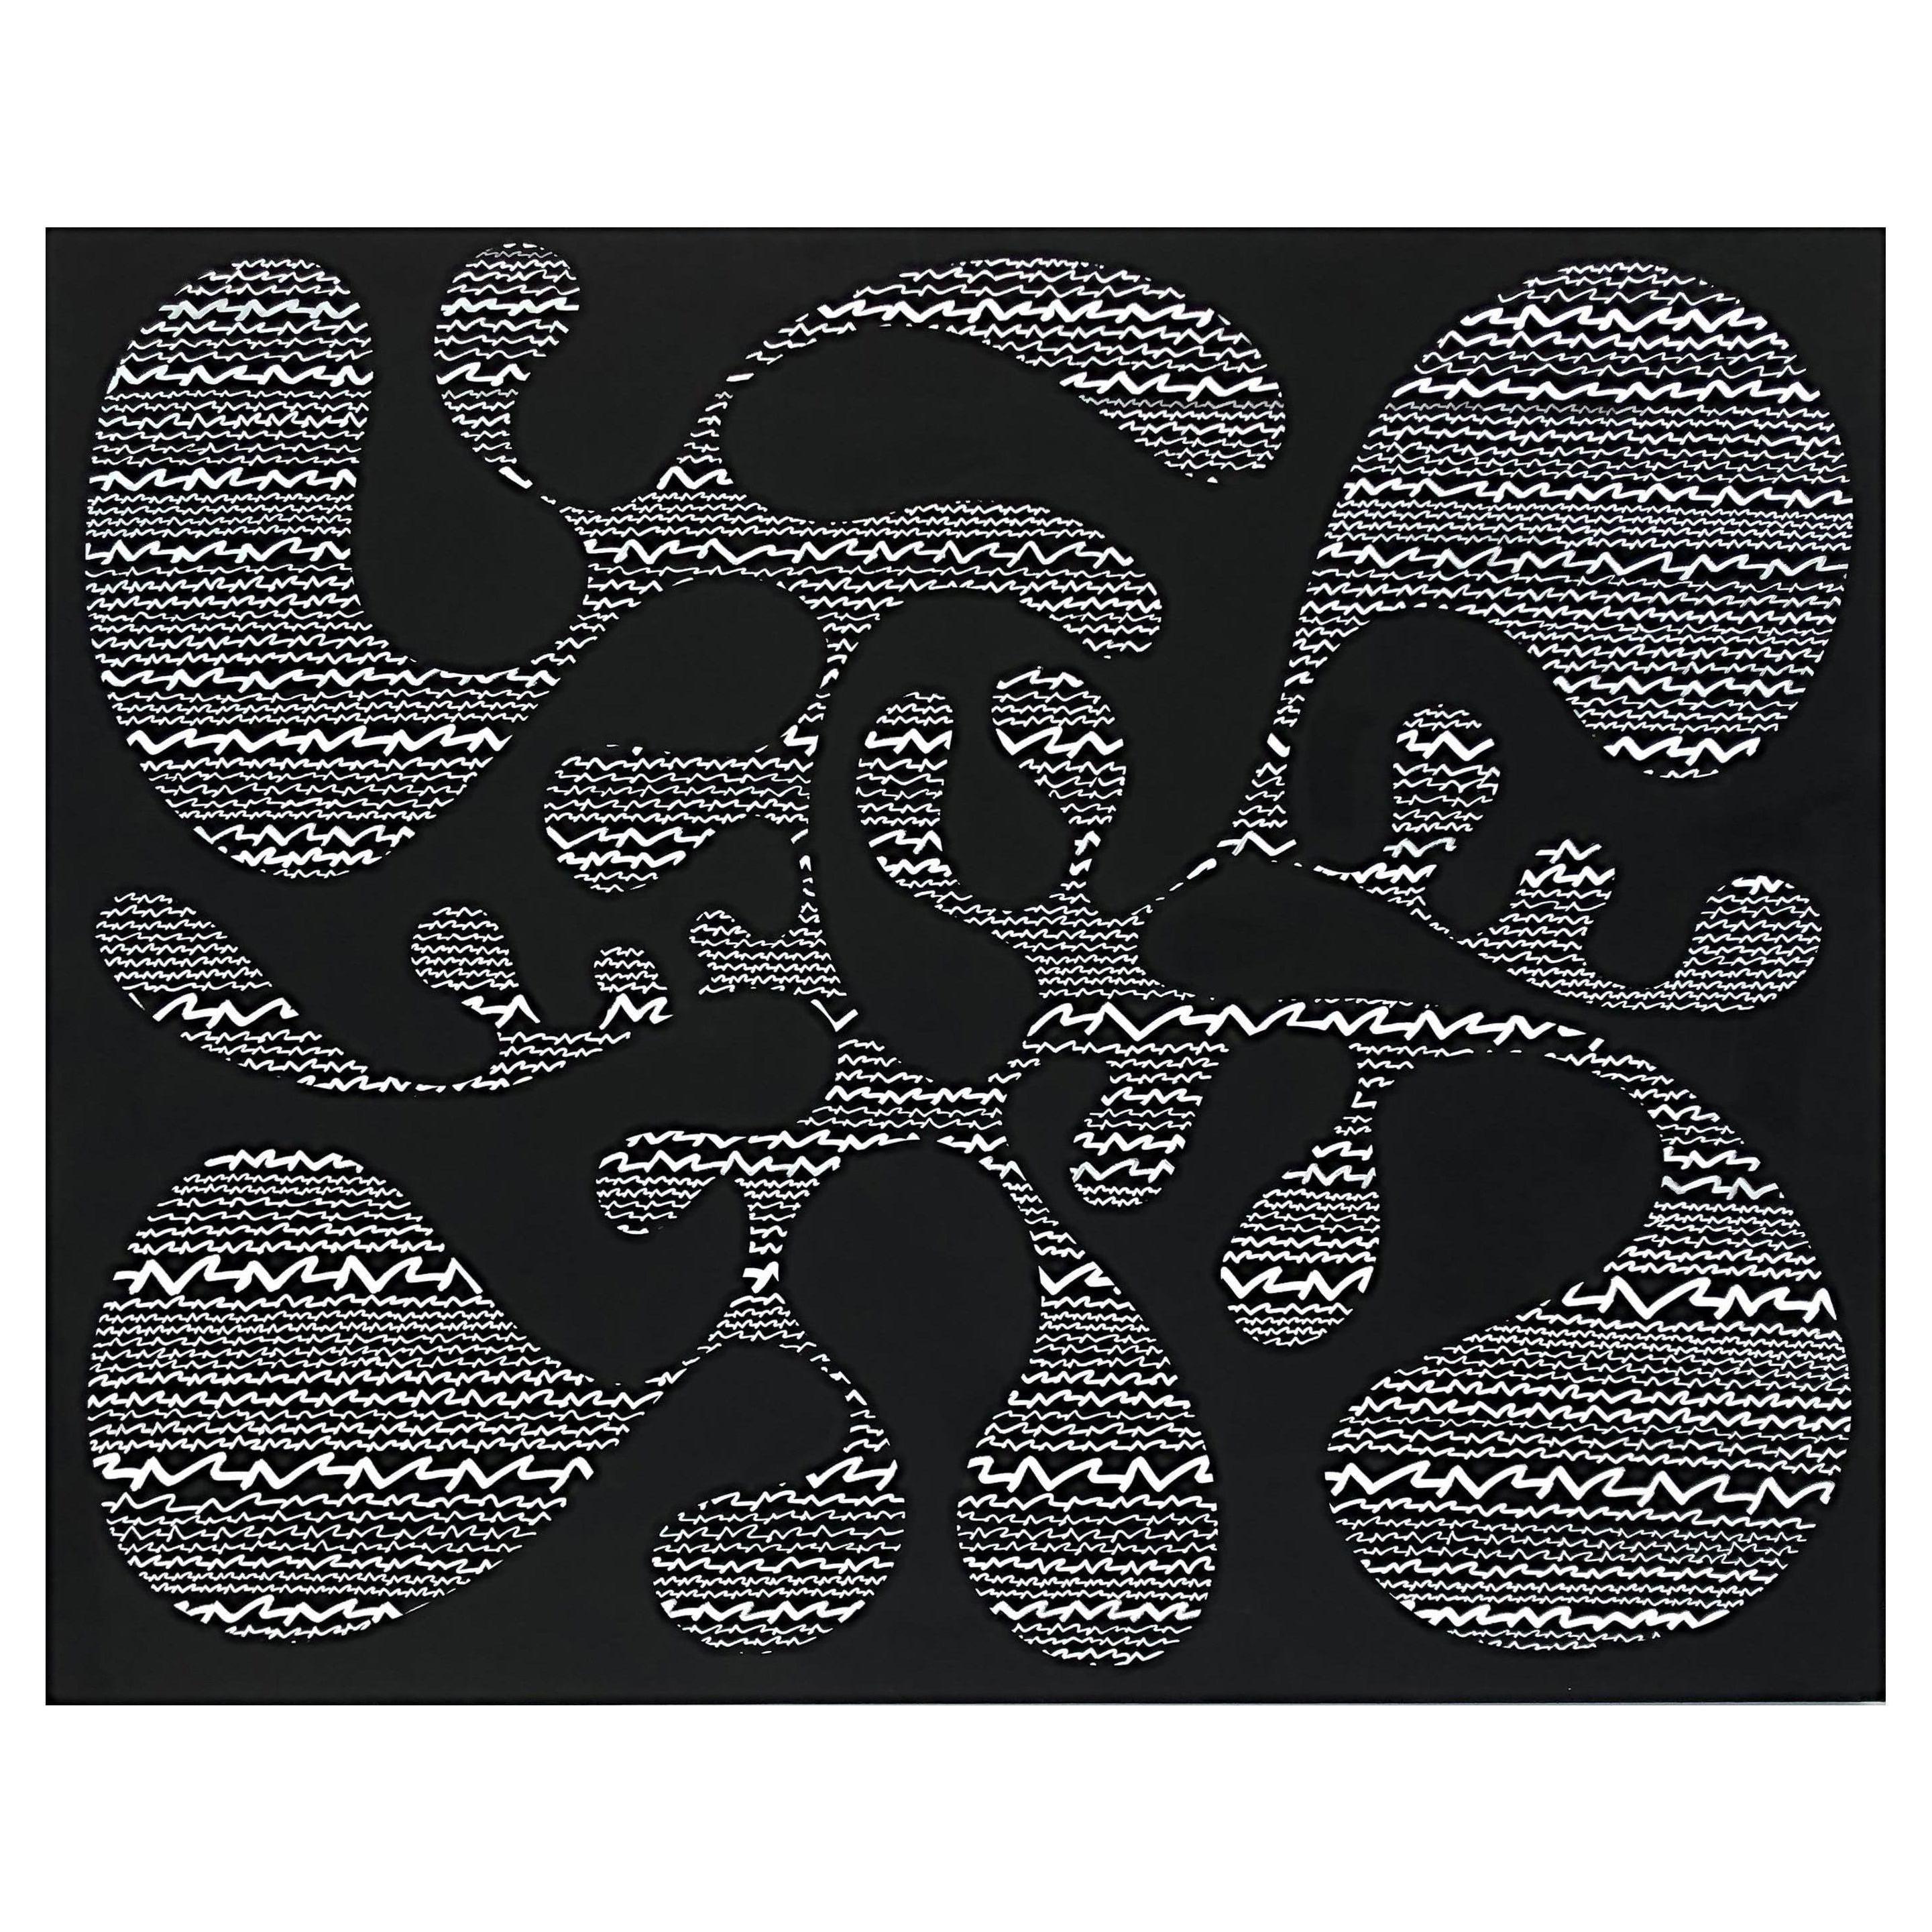 Gustavo Oviedo Abstract Painting on Canvas Titled Binary, 2021 For Sale